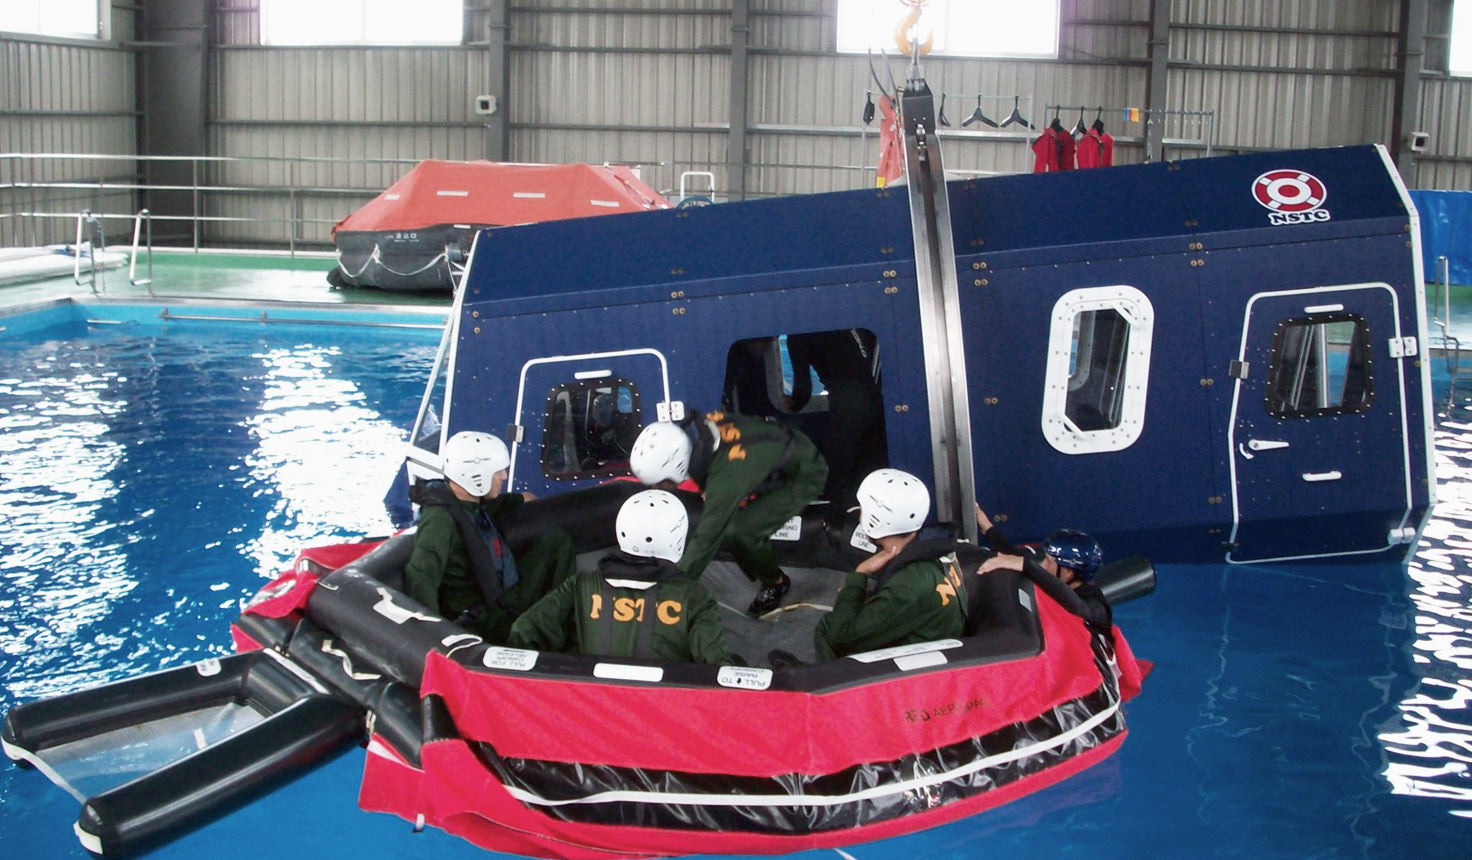 Helicopter water submersion escape training